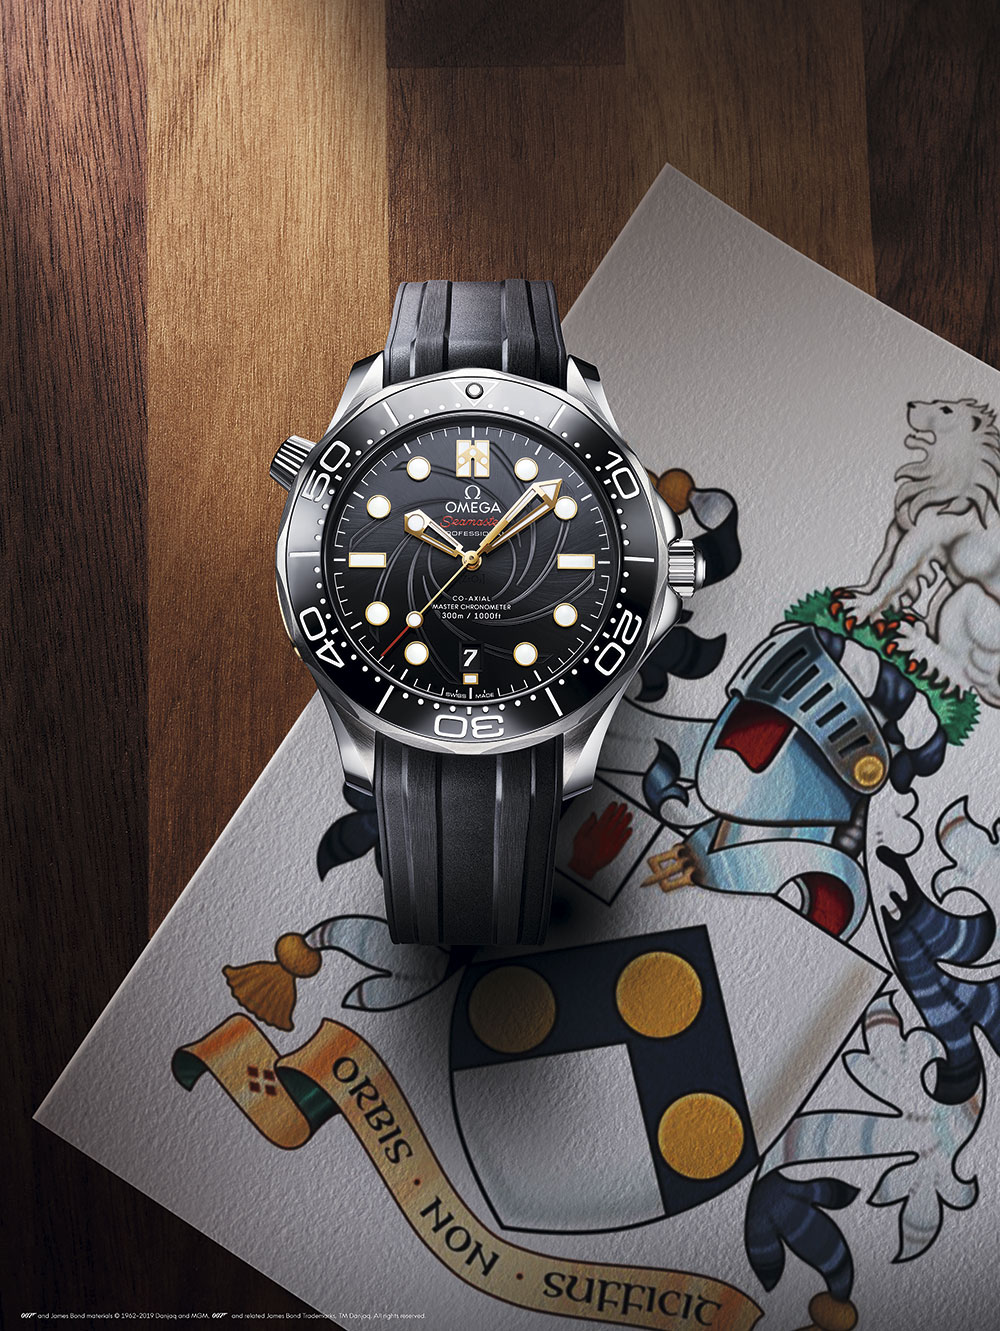 Omega Seamaster Diver 300M “On Her Majesty’s Secret Service” 50th Anniversary